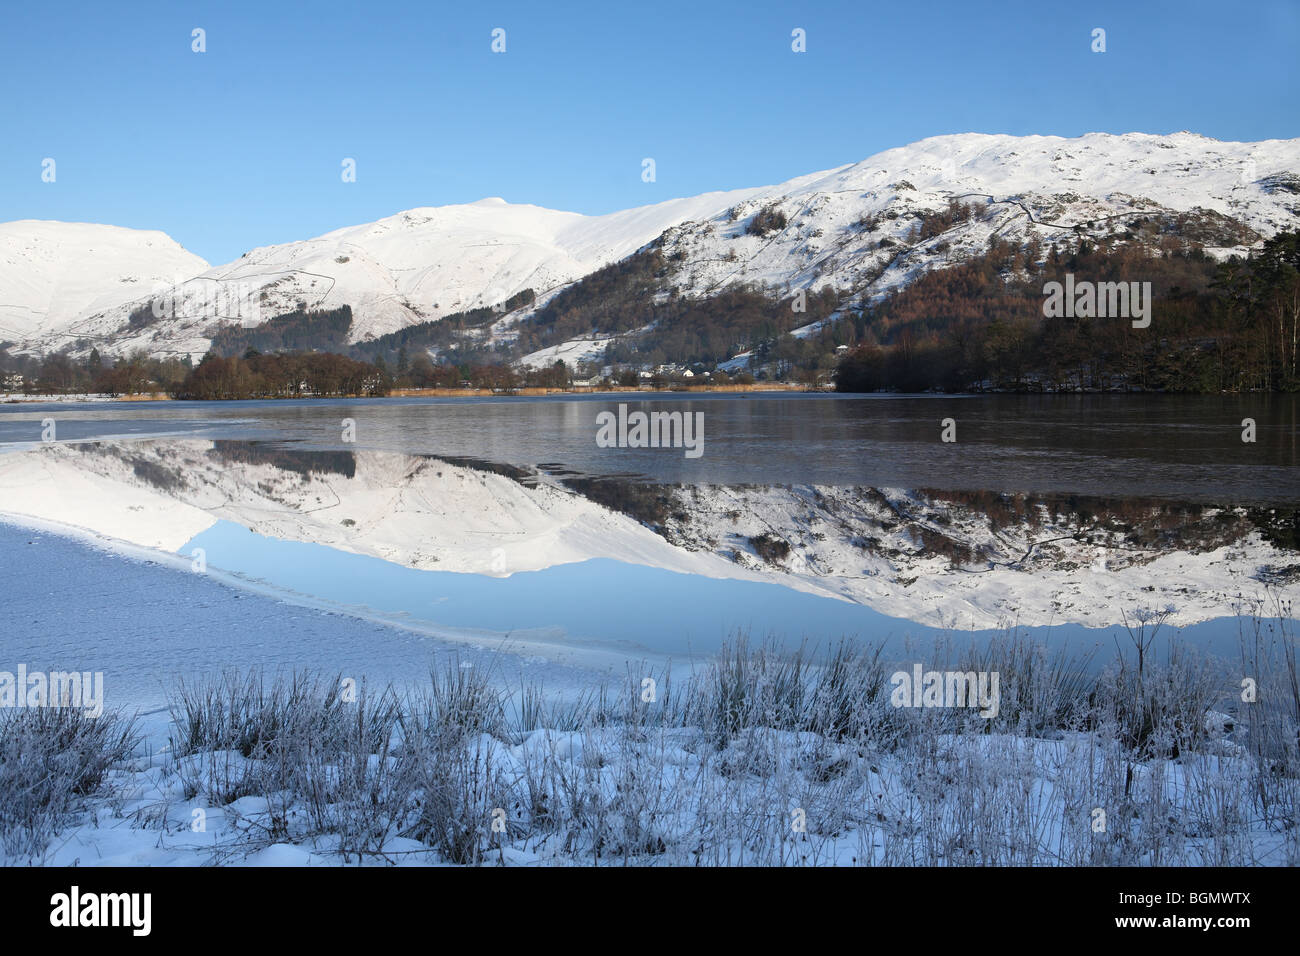 Grasmere with snow clad mountains reflected in the lake, Cumbria, UK Stock Photo